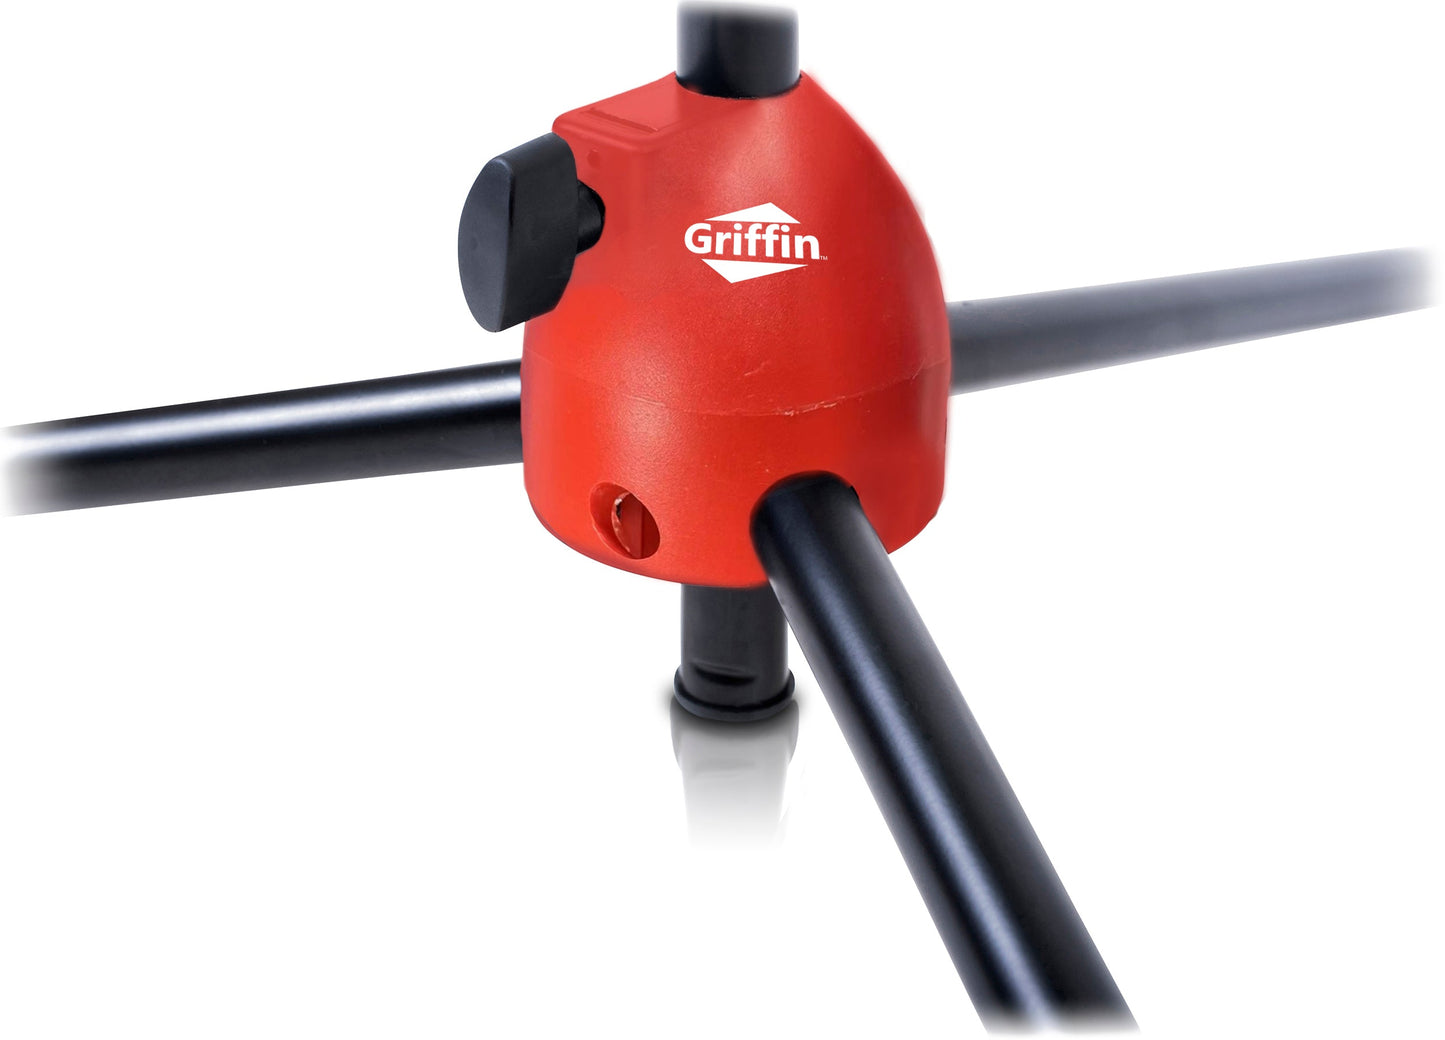 Microphone Stand with Telescopic Boom Arm (Pack of 3) by GRIFFIN - Adjustable Holder Mount For Studio Recording Accessories, Singing Vocal Karaoke